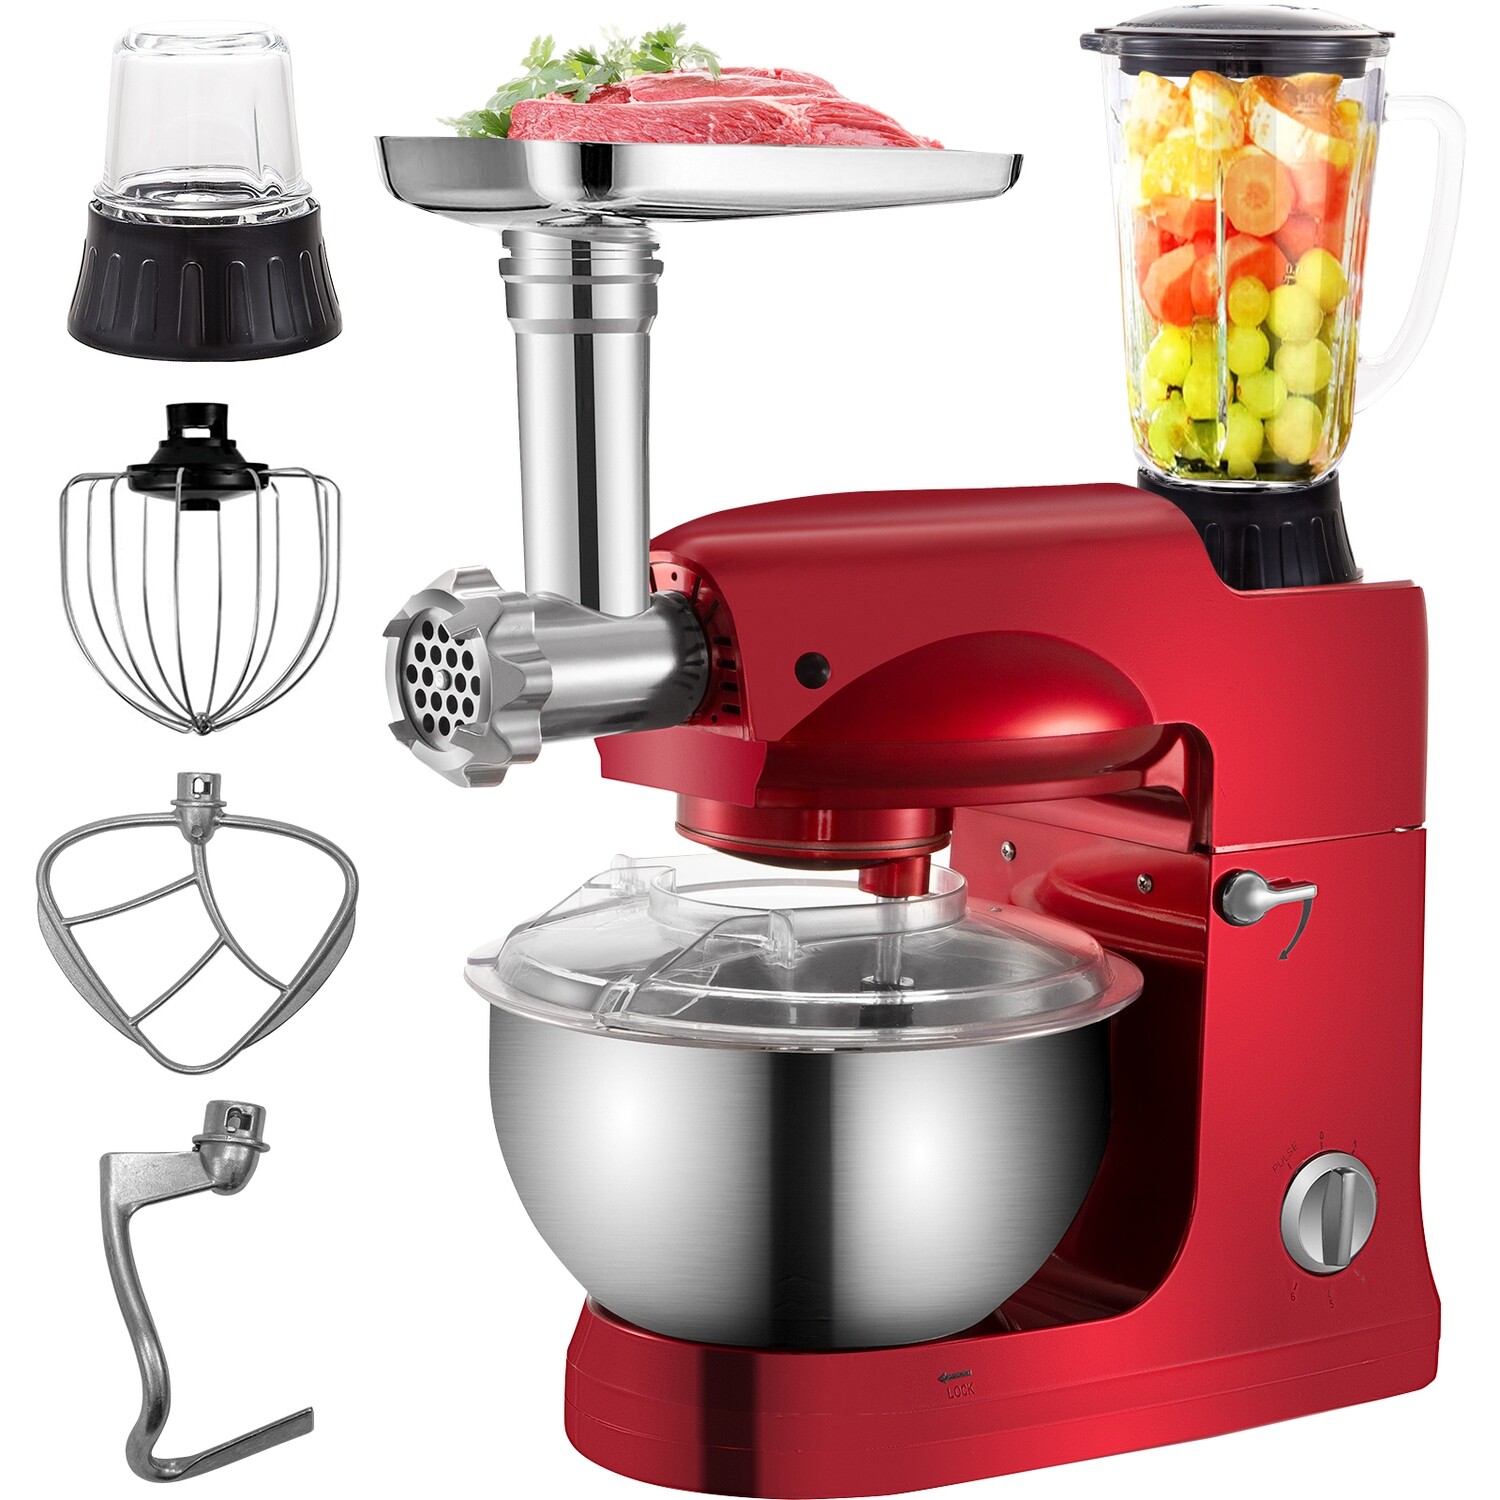 4-in-1 Stand Mixer Meat Grinder Juice Blender (Red 1000w 5qt)